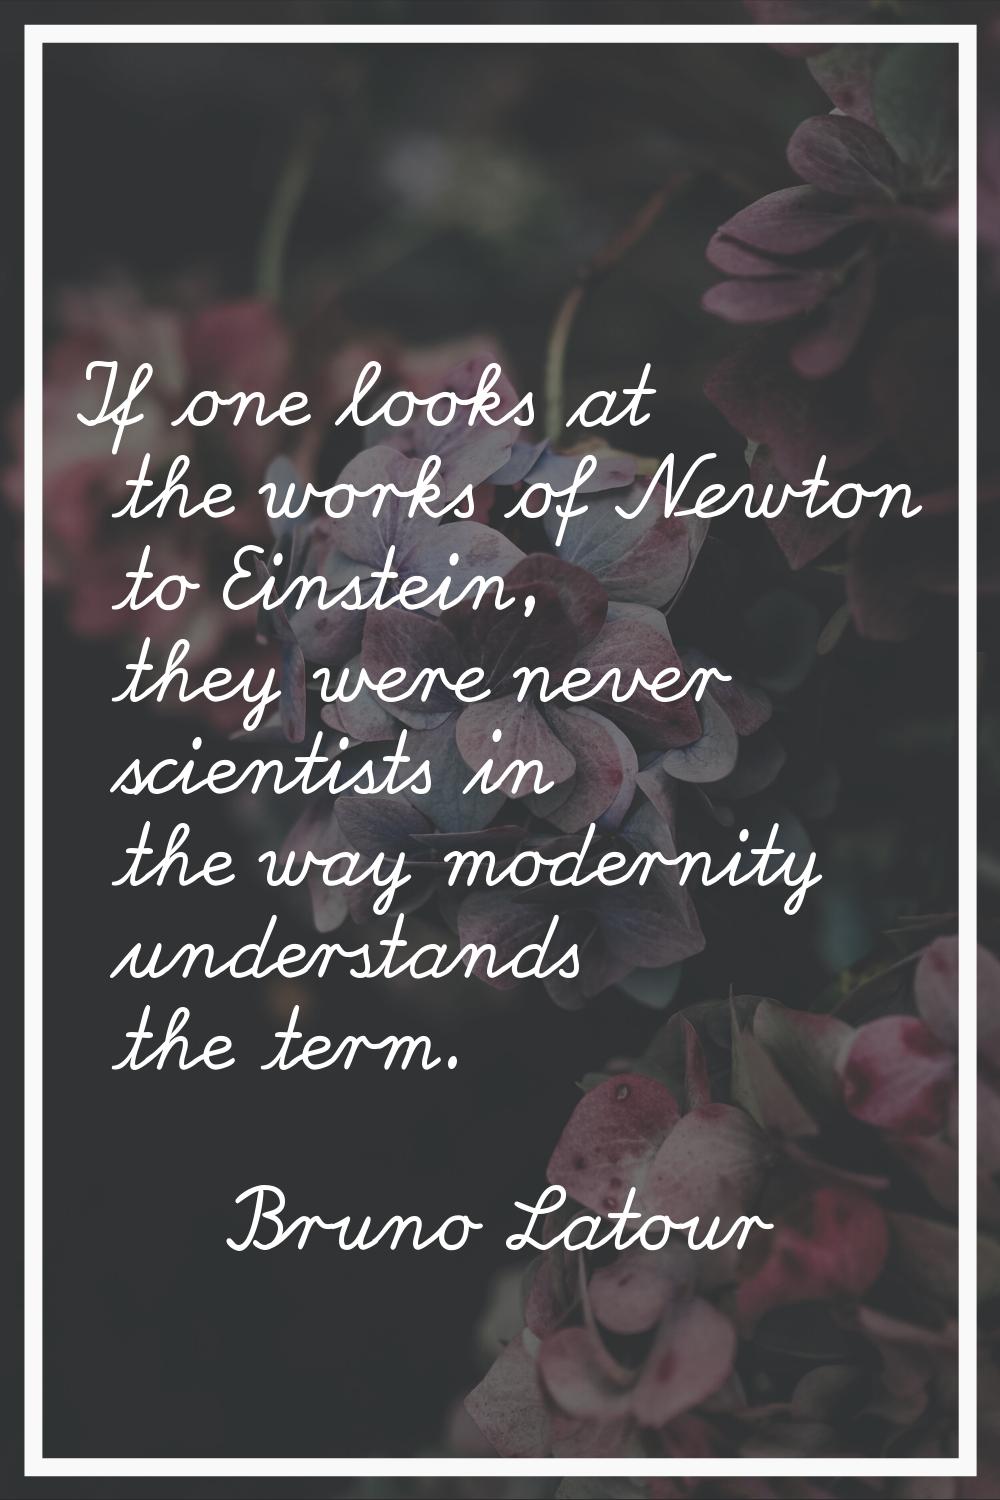 If one looks at the works of Newton to Einstein, they were never scientists in the way modernity un